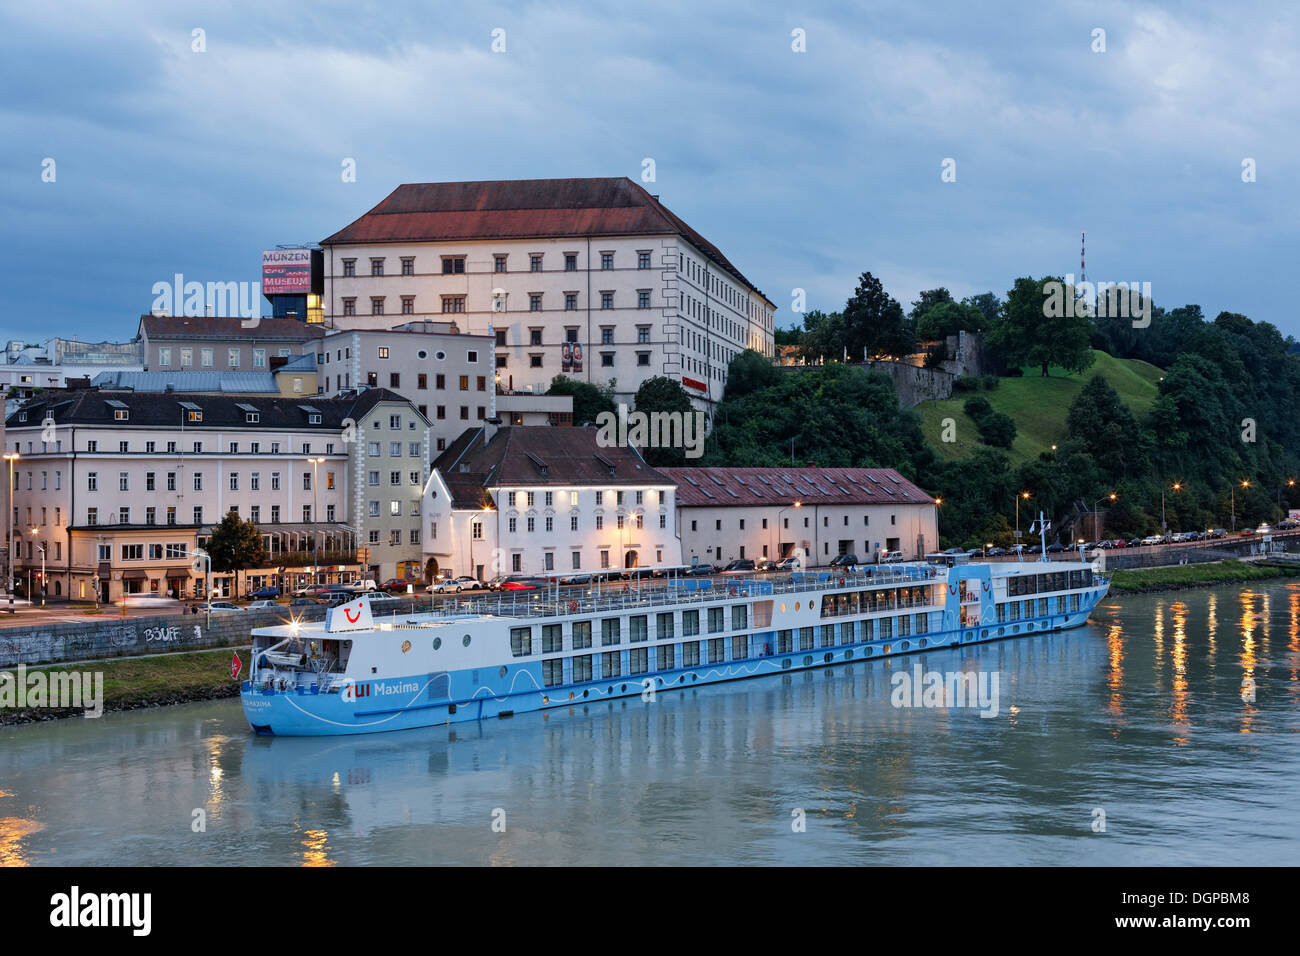 TUI Maxima, a cruise ship floating on the Danube river, Linz Castle at the back, Linz, Upper Austria, Austria, Europe Stock Photo